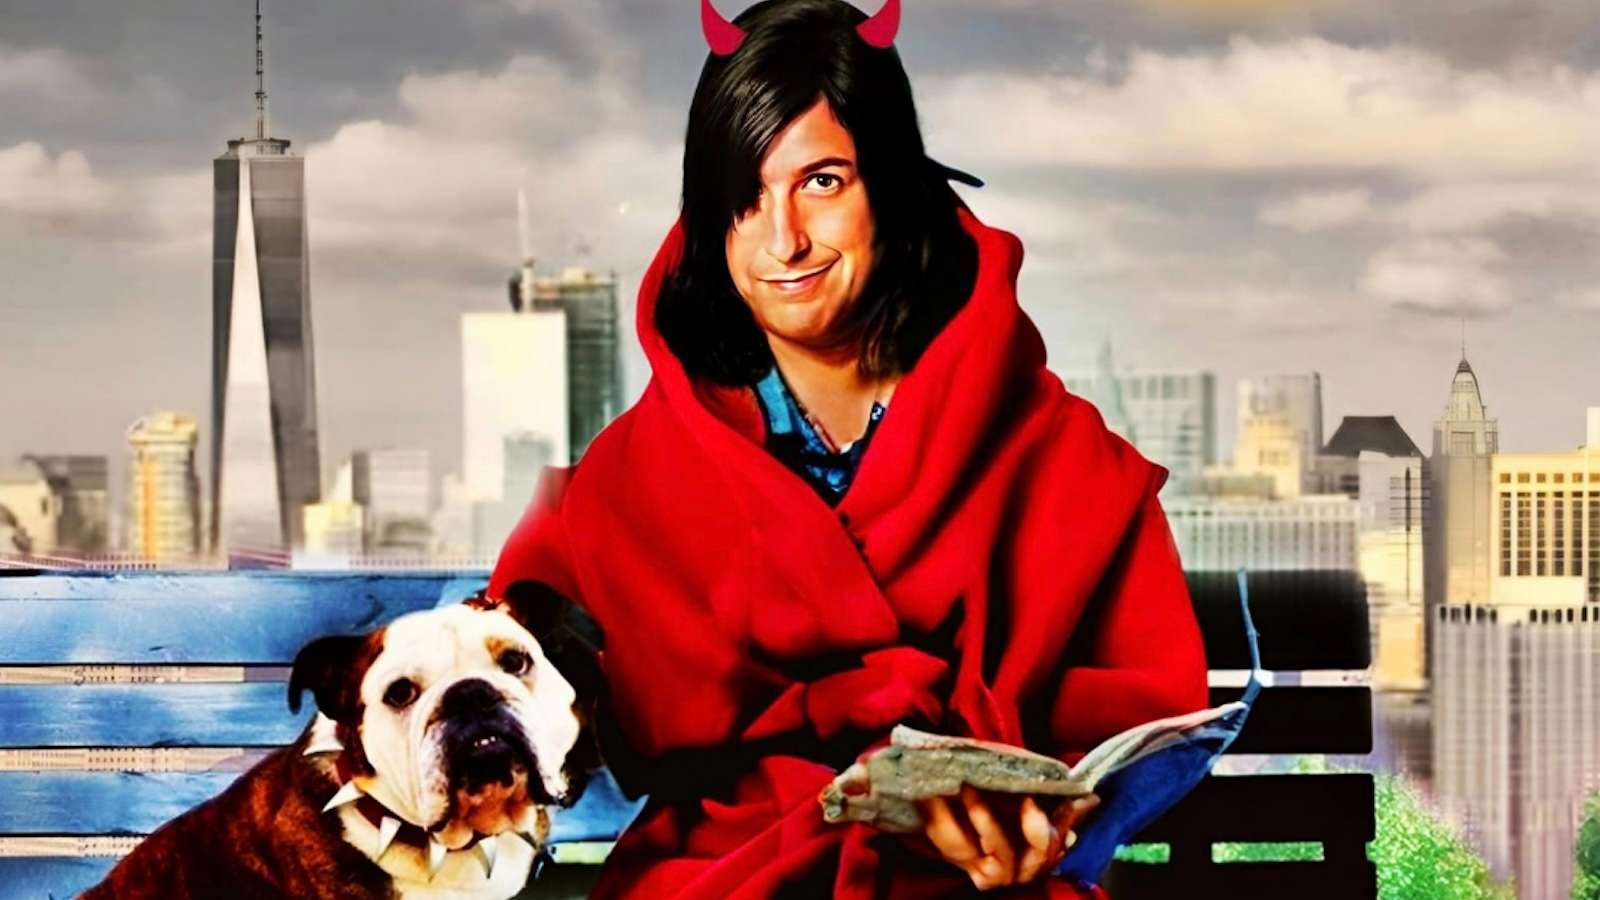 Fake movie poster for Little Nicky 2